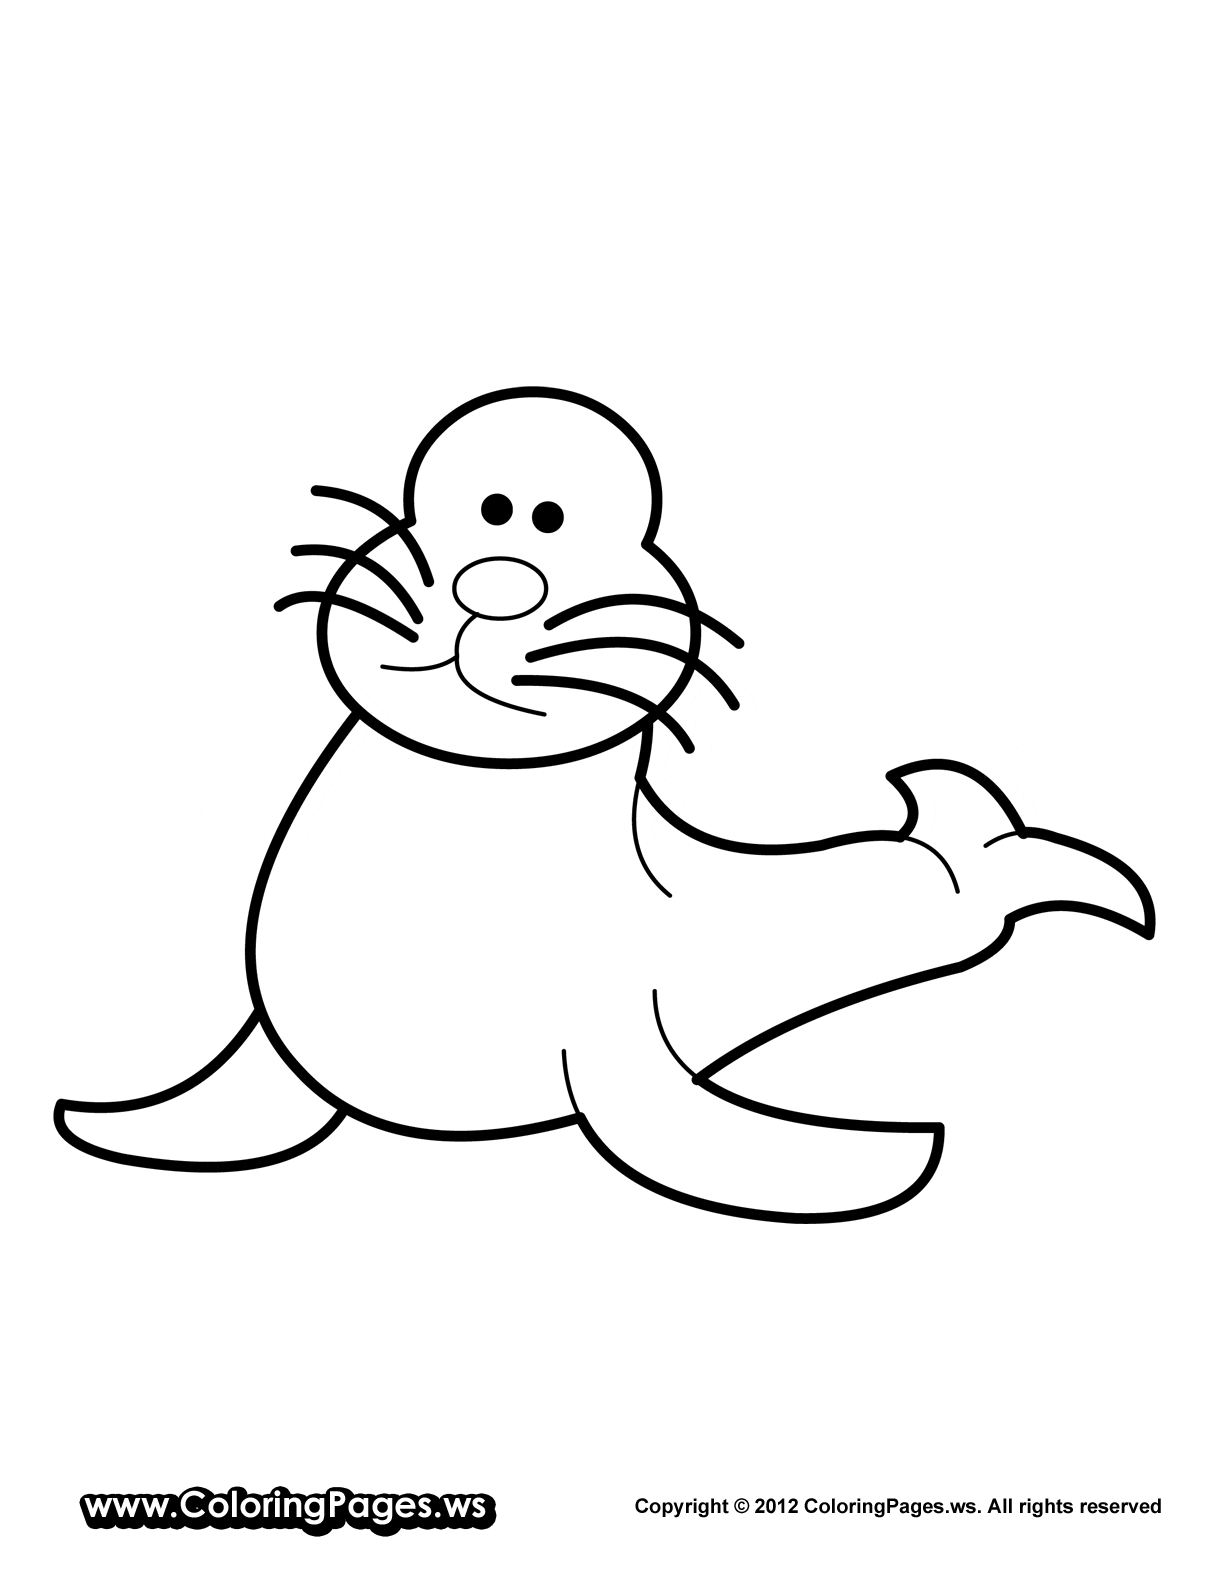 Seal Image For Children Coloring Page